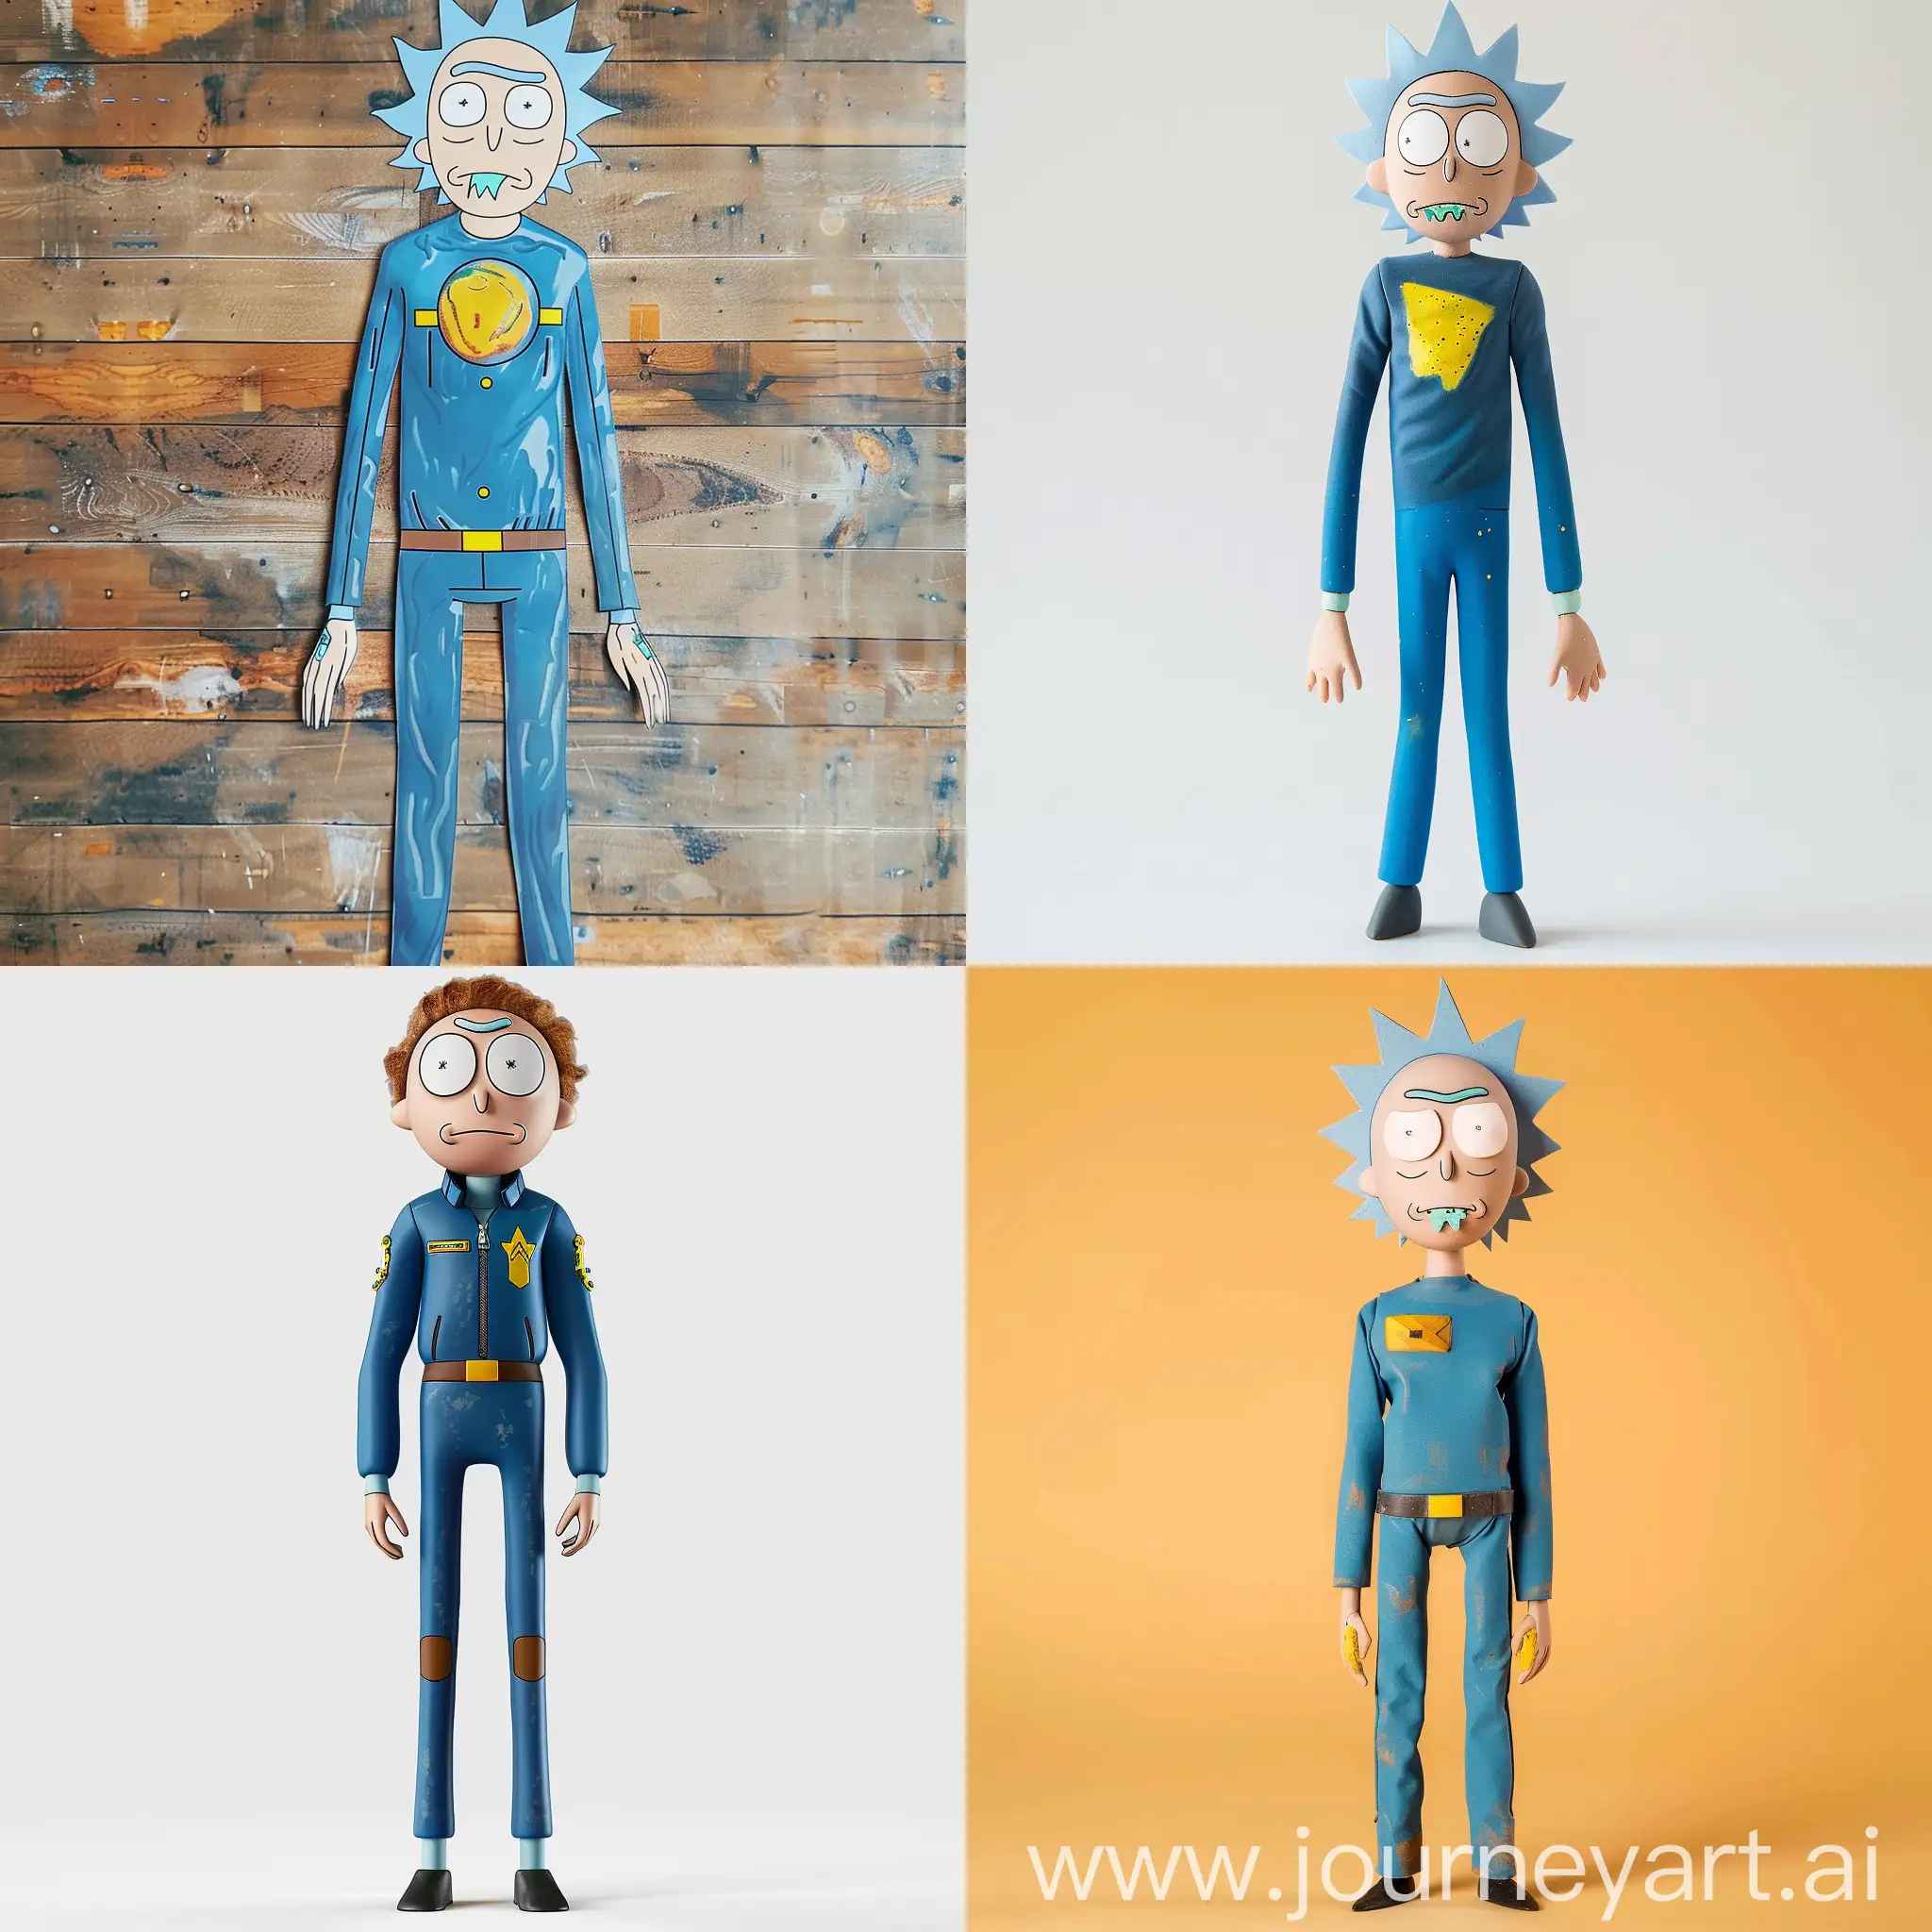 Morty-from-Rick-and-Morty-Wearing-Blue-Jumpsuit-and-Yellow-Chest-Design